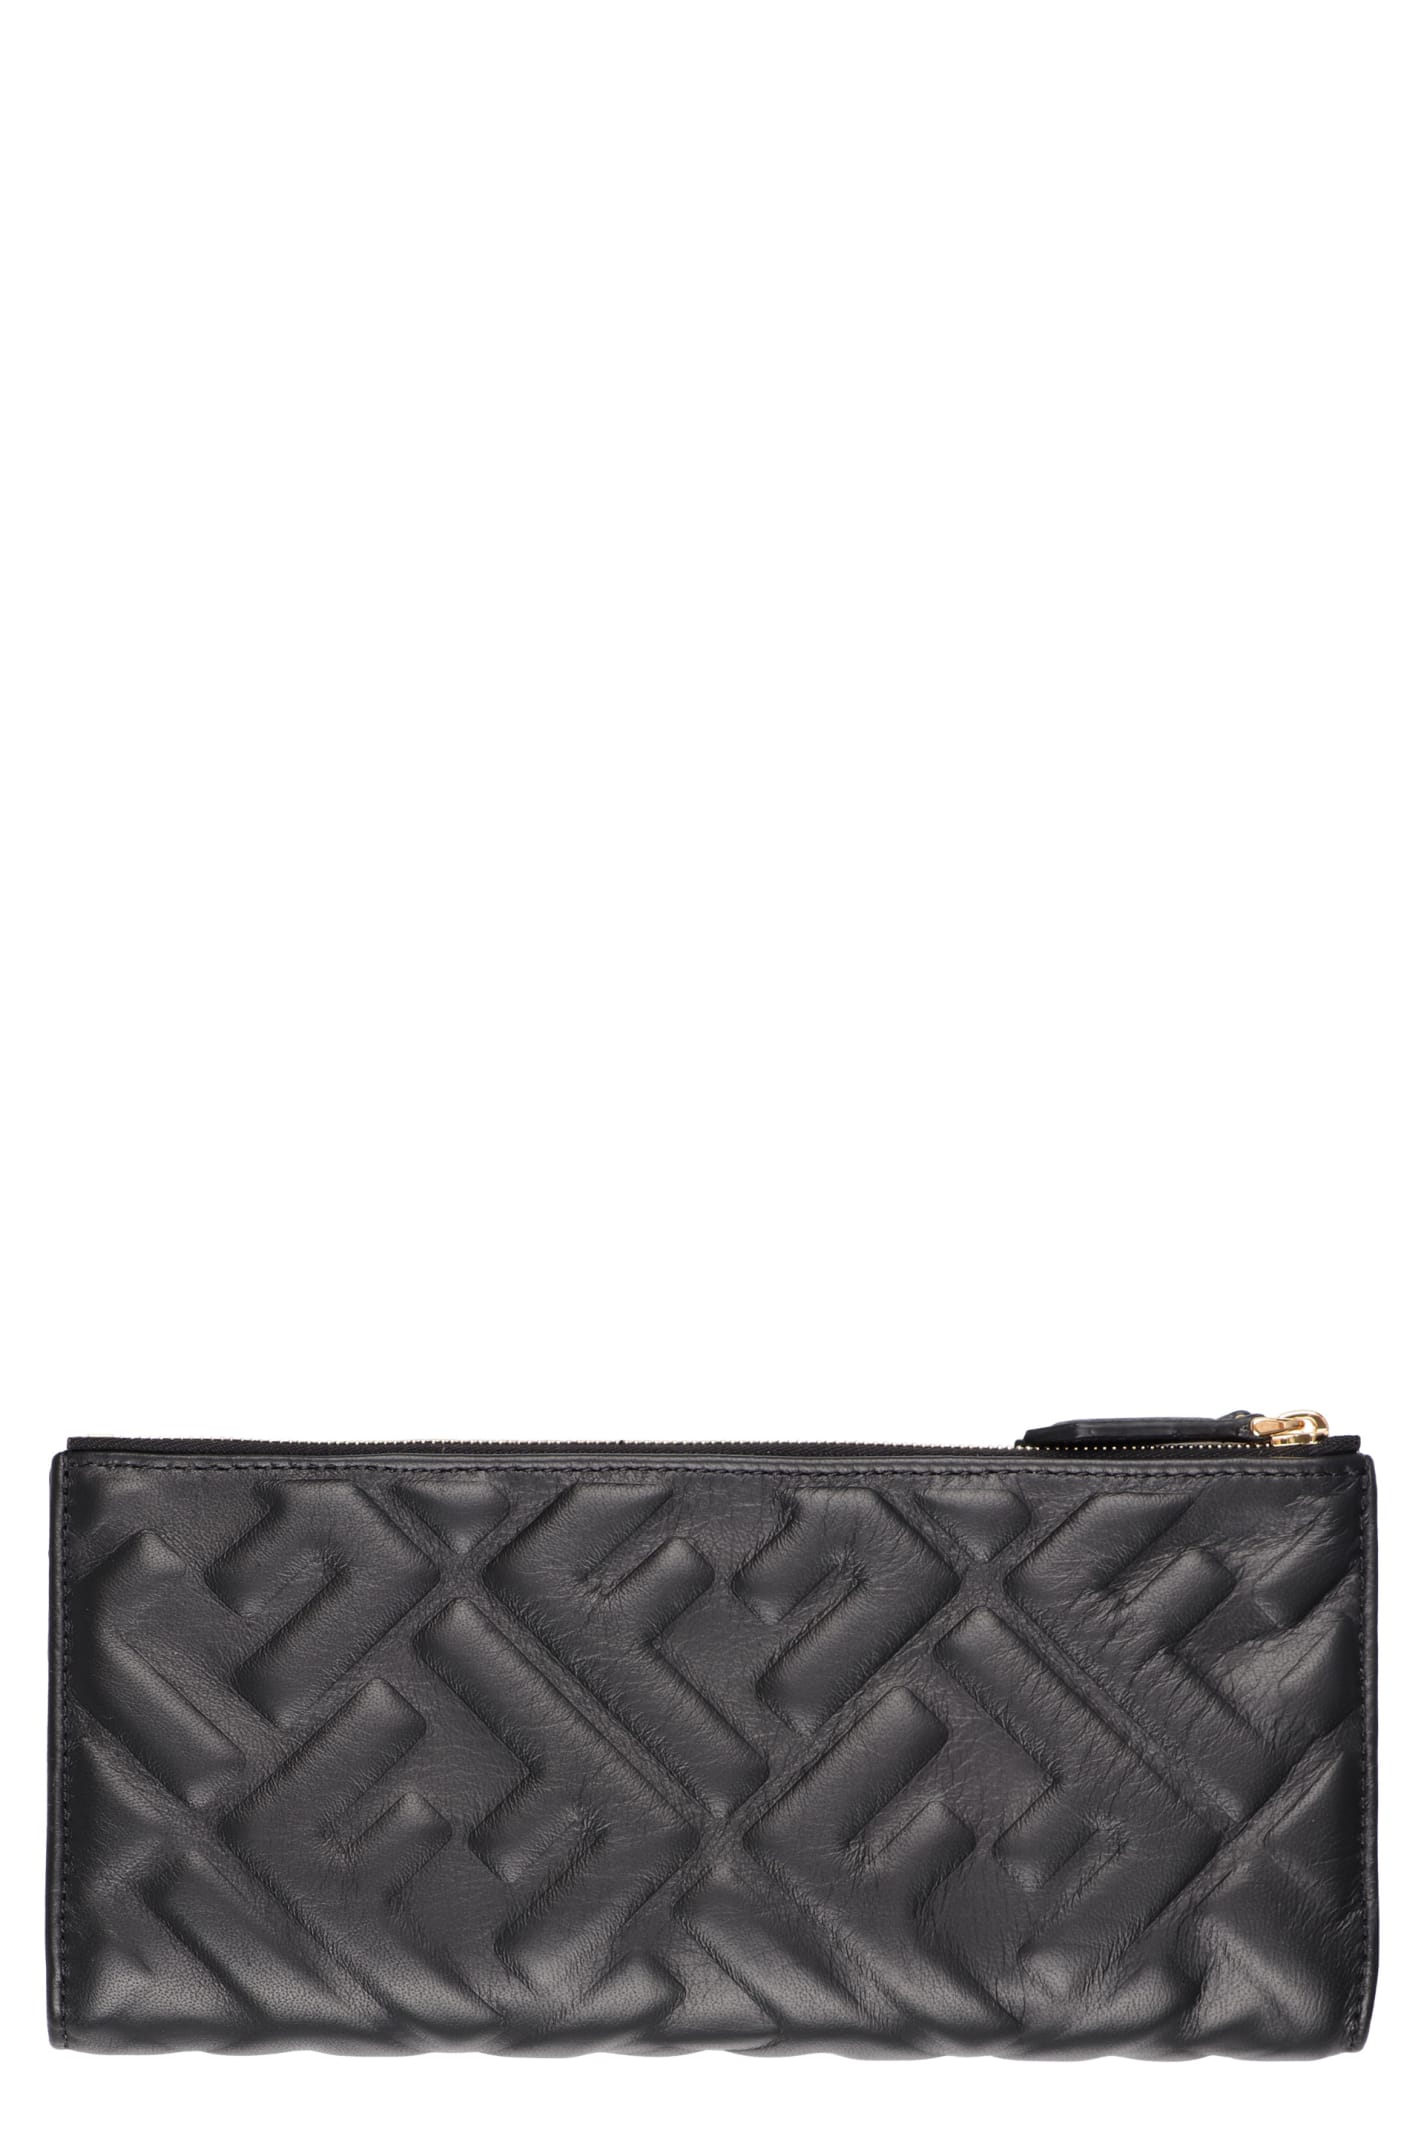 Fendi All-over Logo Printed Leather Wallet In Black